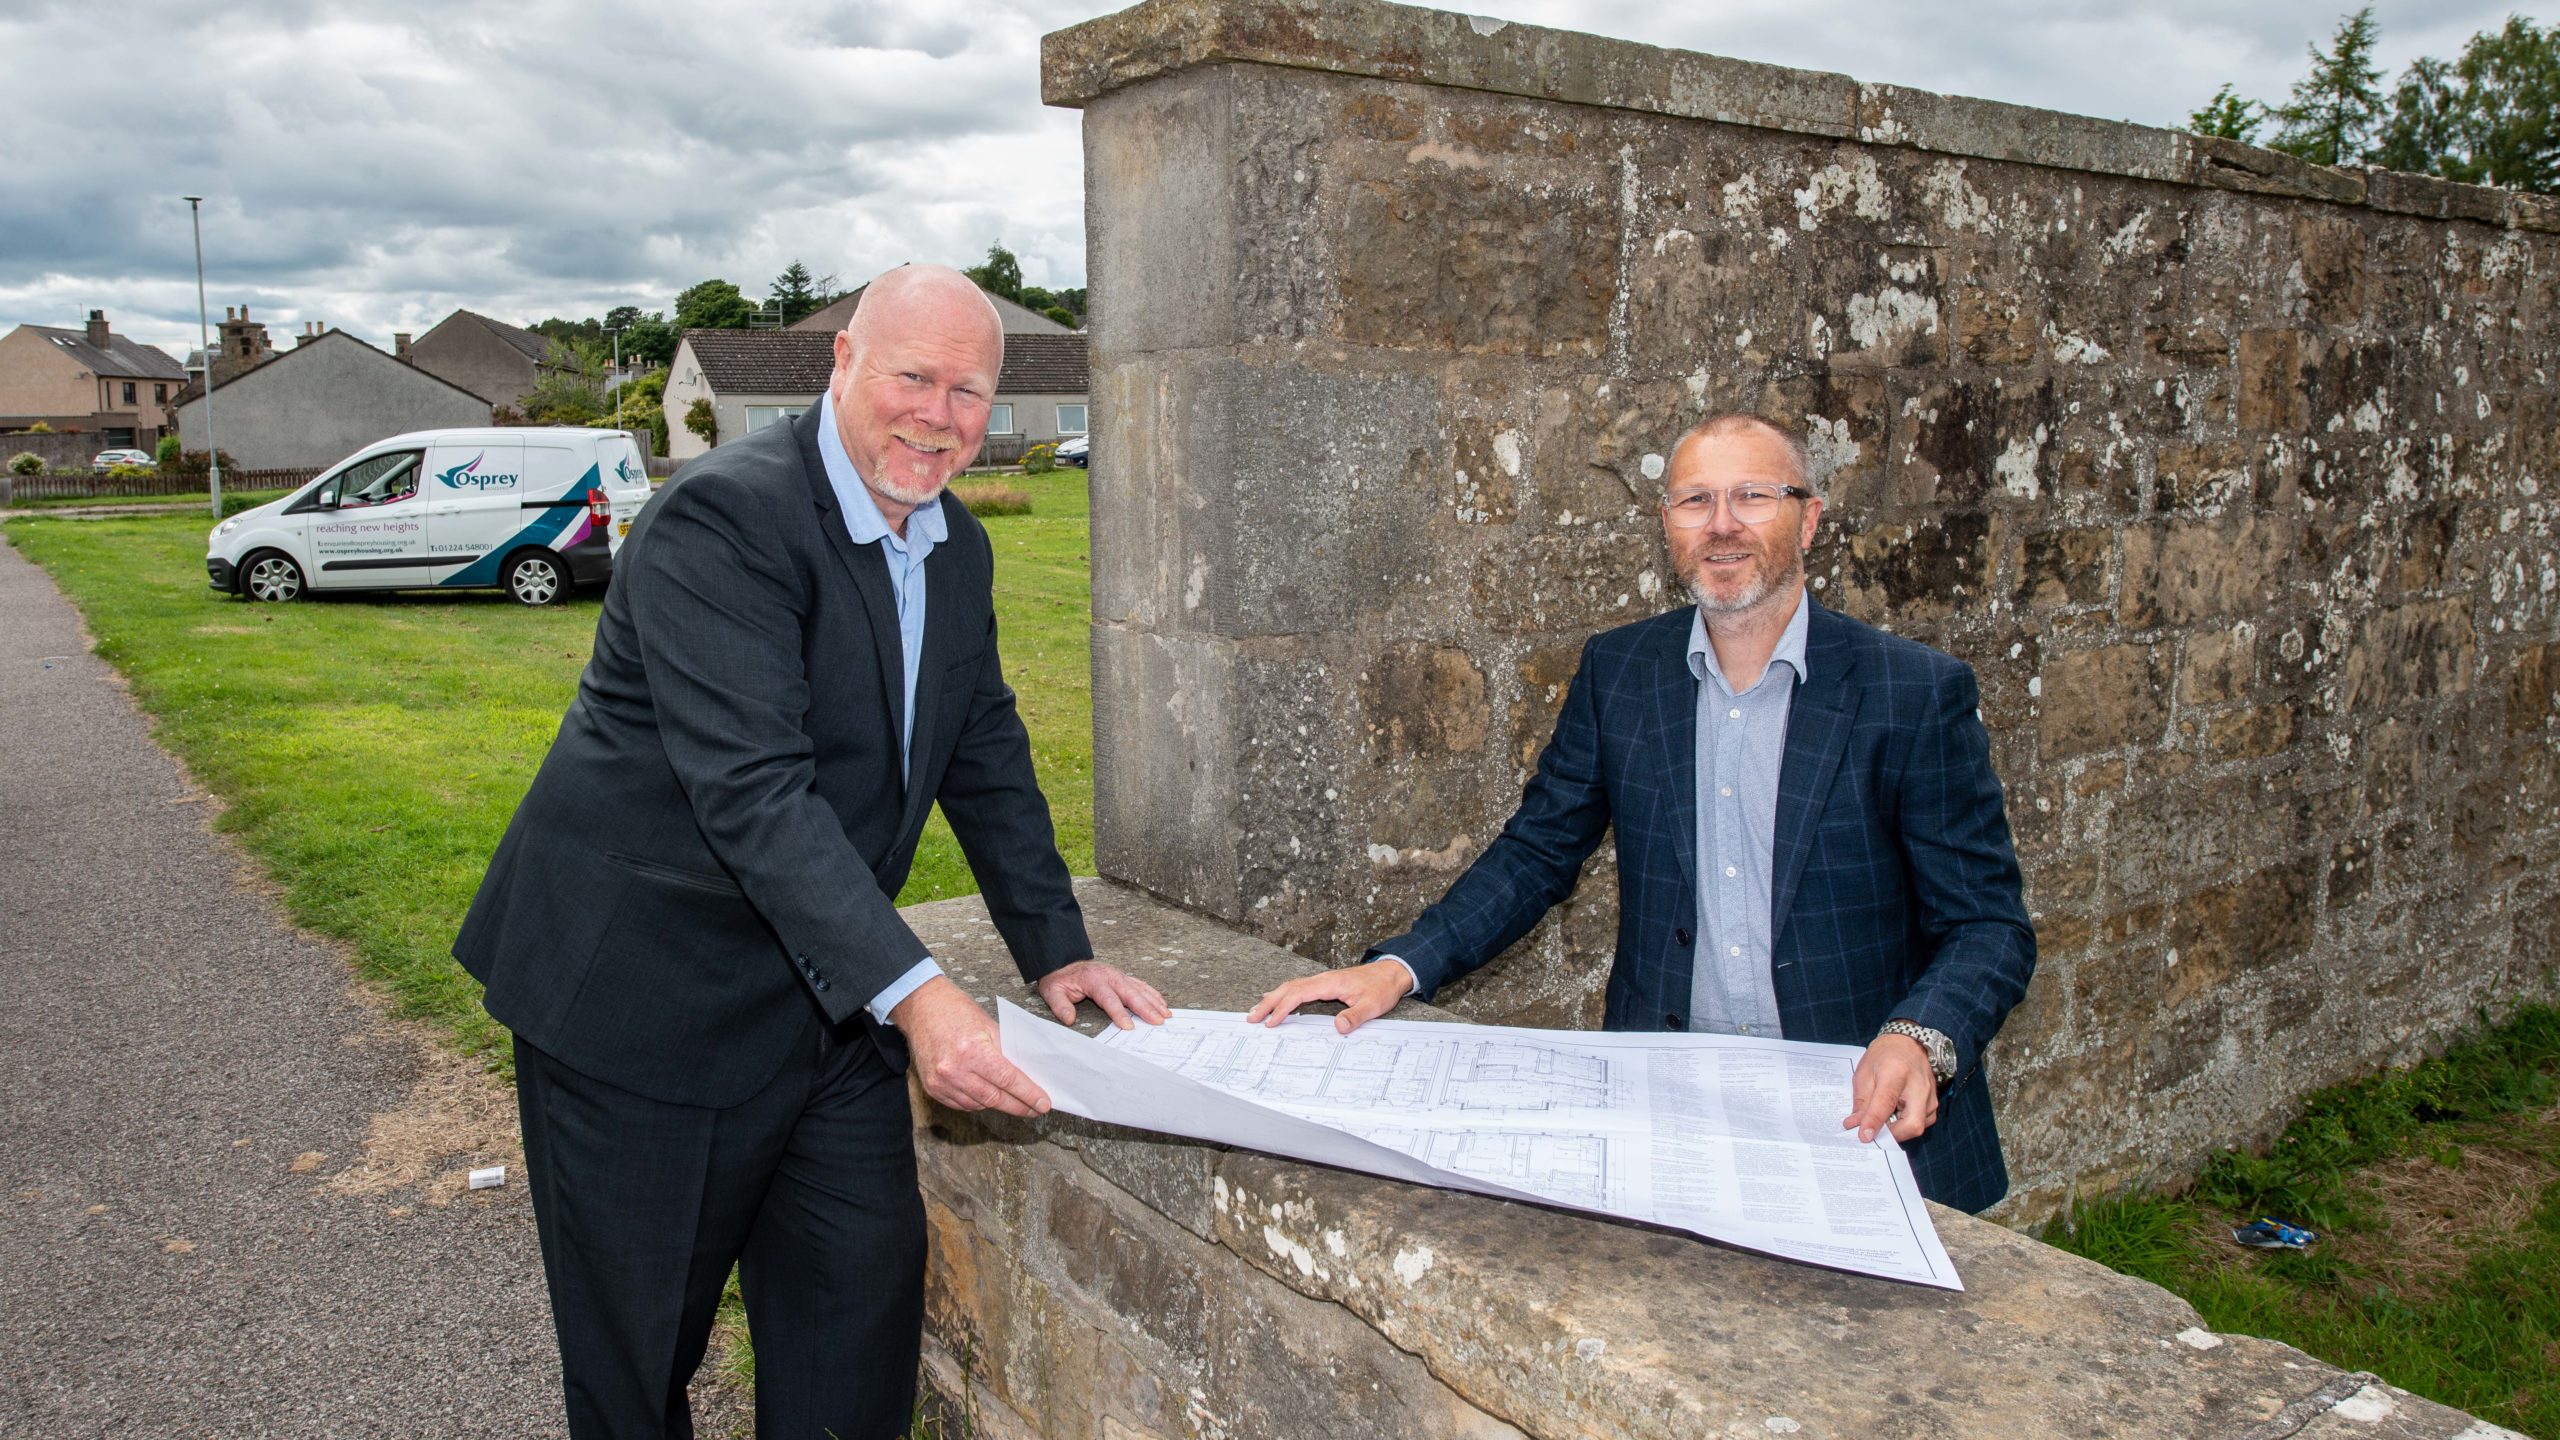 Allan Liddle (left), development officer at Osprey Housing Group and John Main (right), managing director of Morlich Homes.